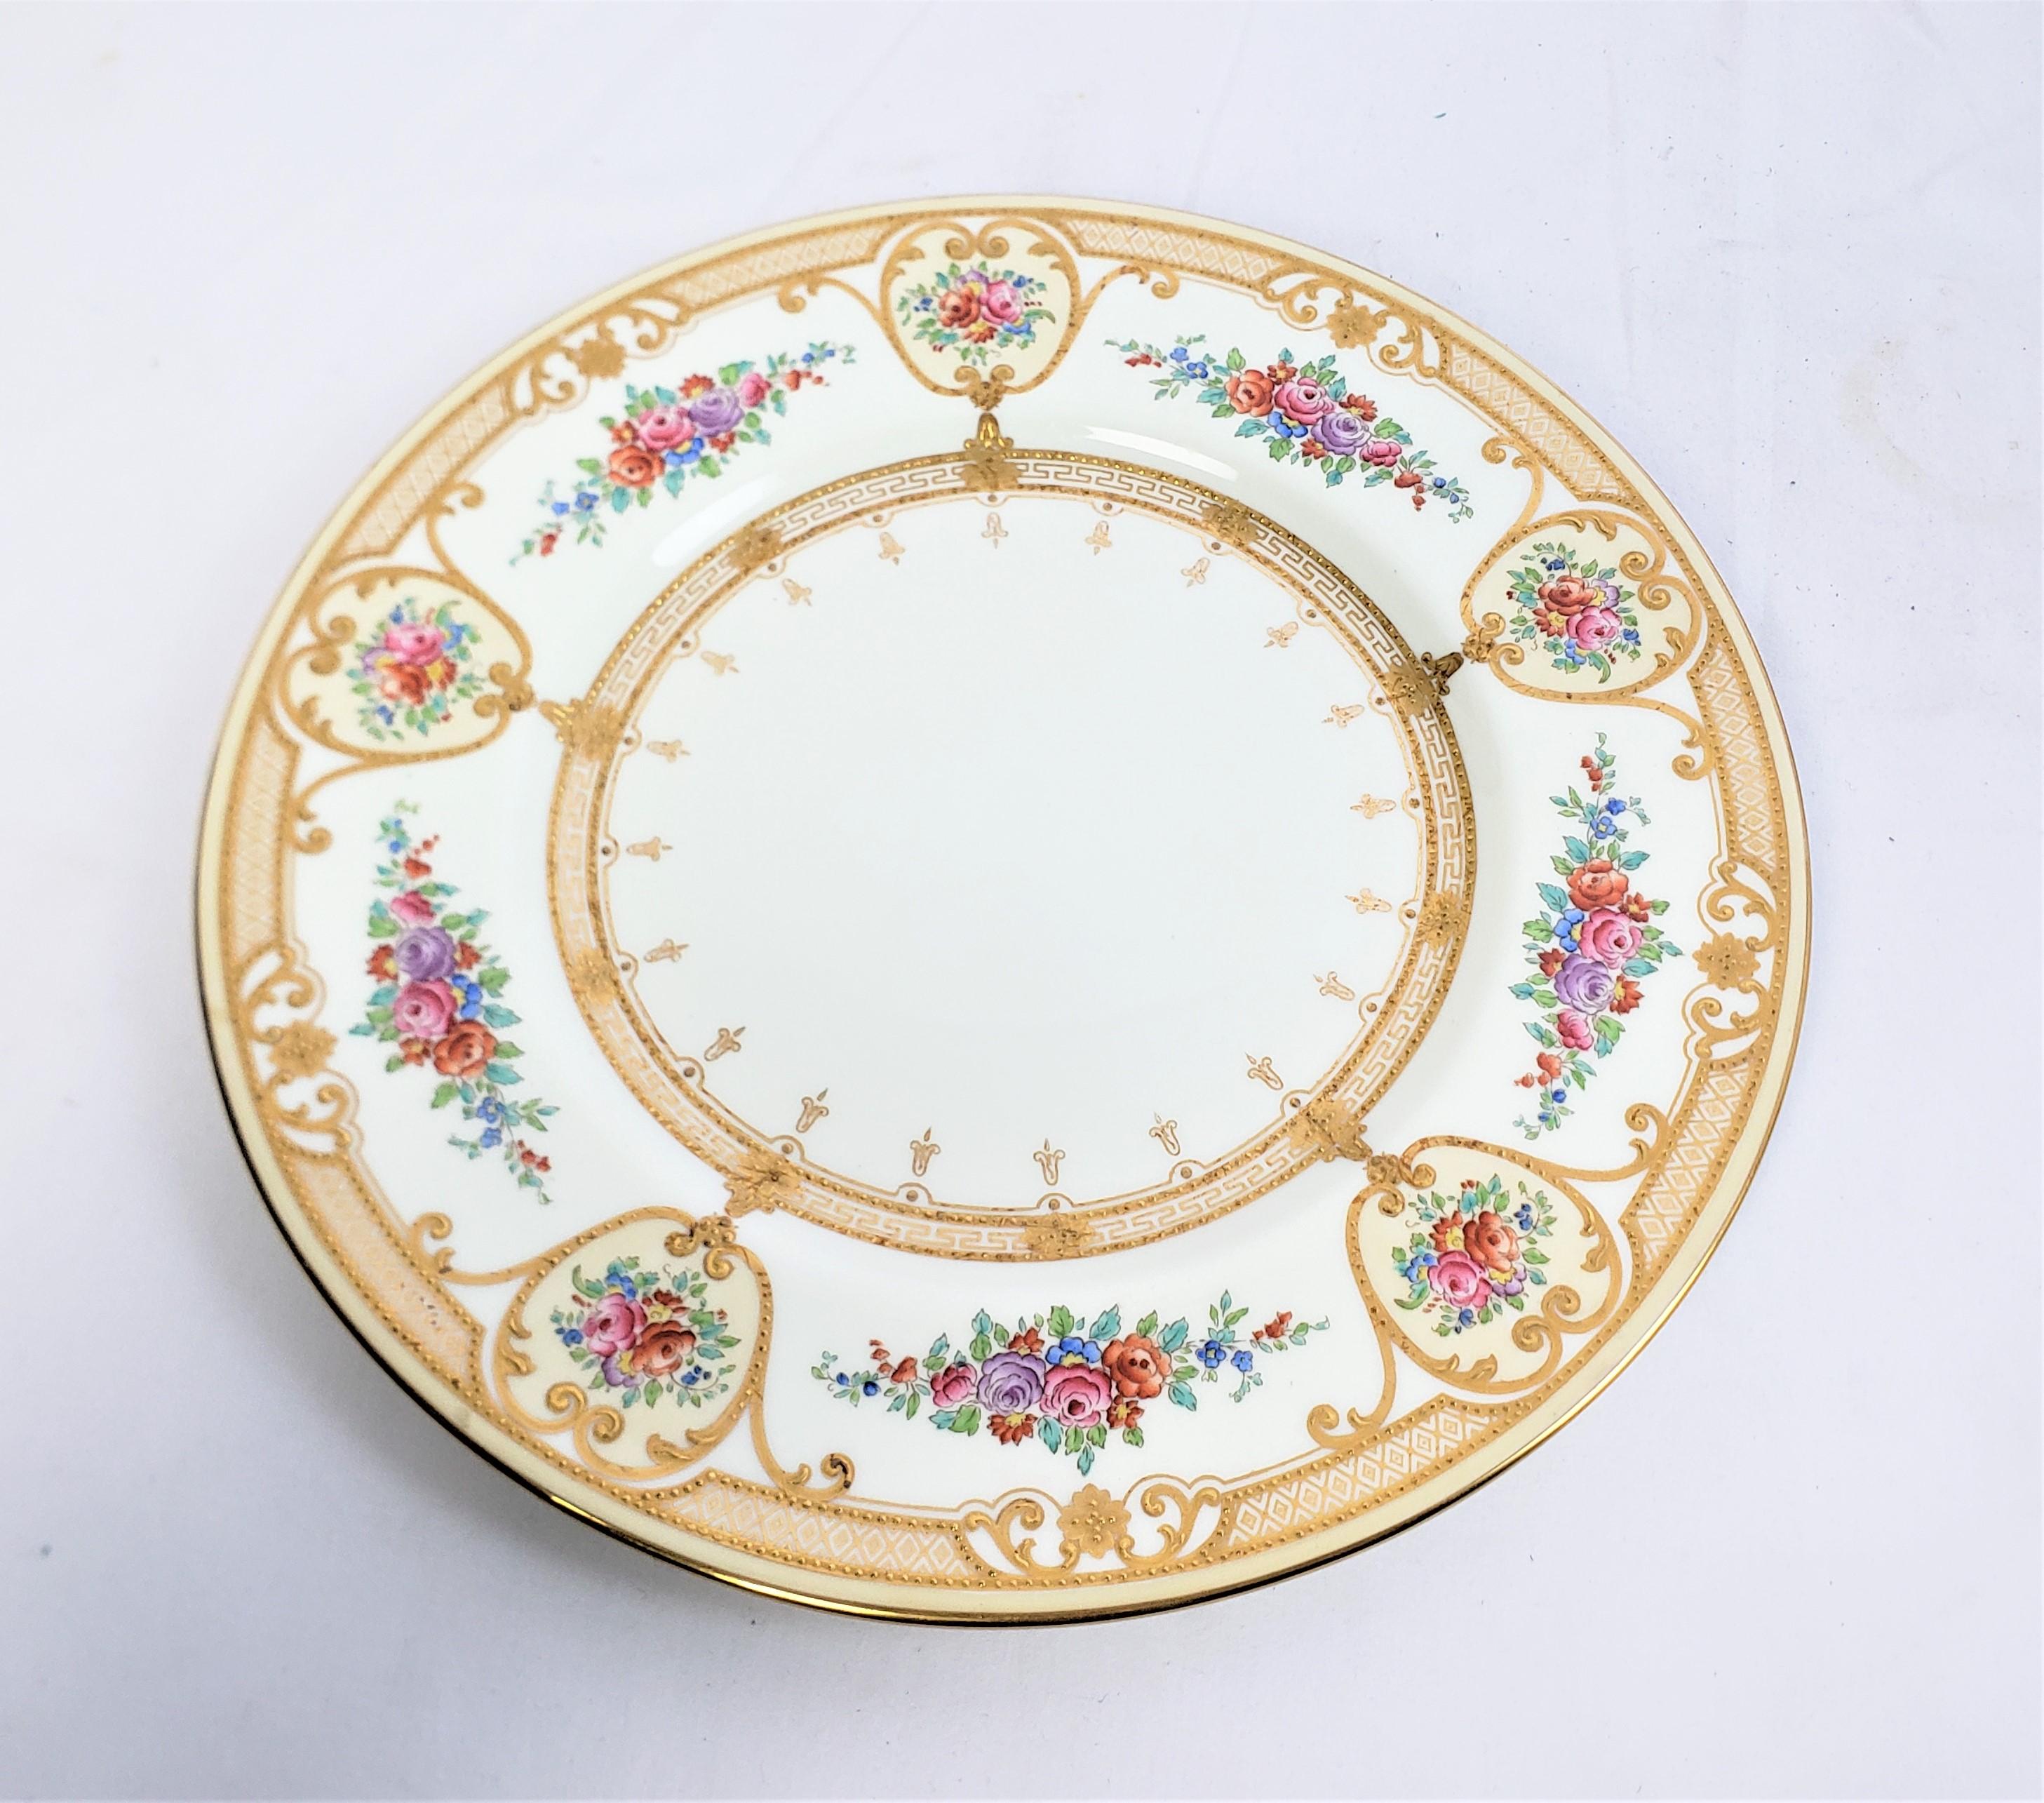 Set of 12 Antique Wedgewood Dinner Plates with Heavy Gilt & Floral Decoration In Good Condition For Sale In Hamilton, Ontario